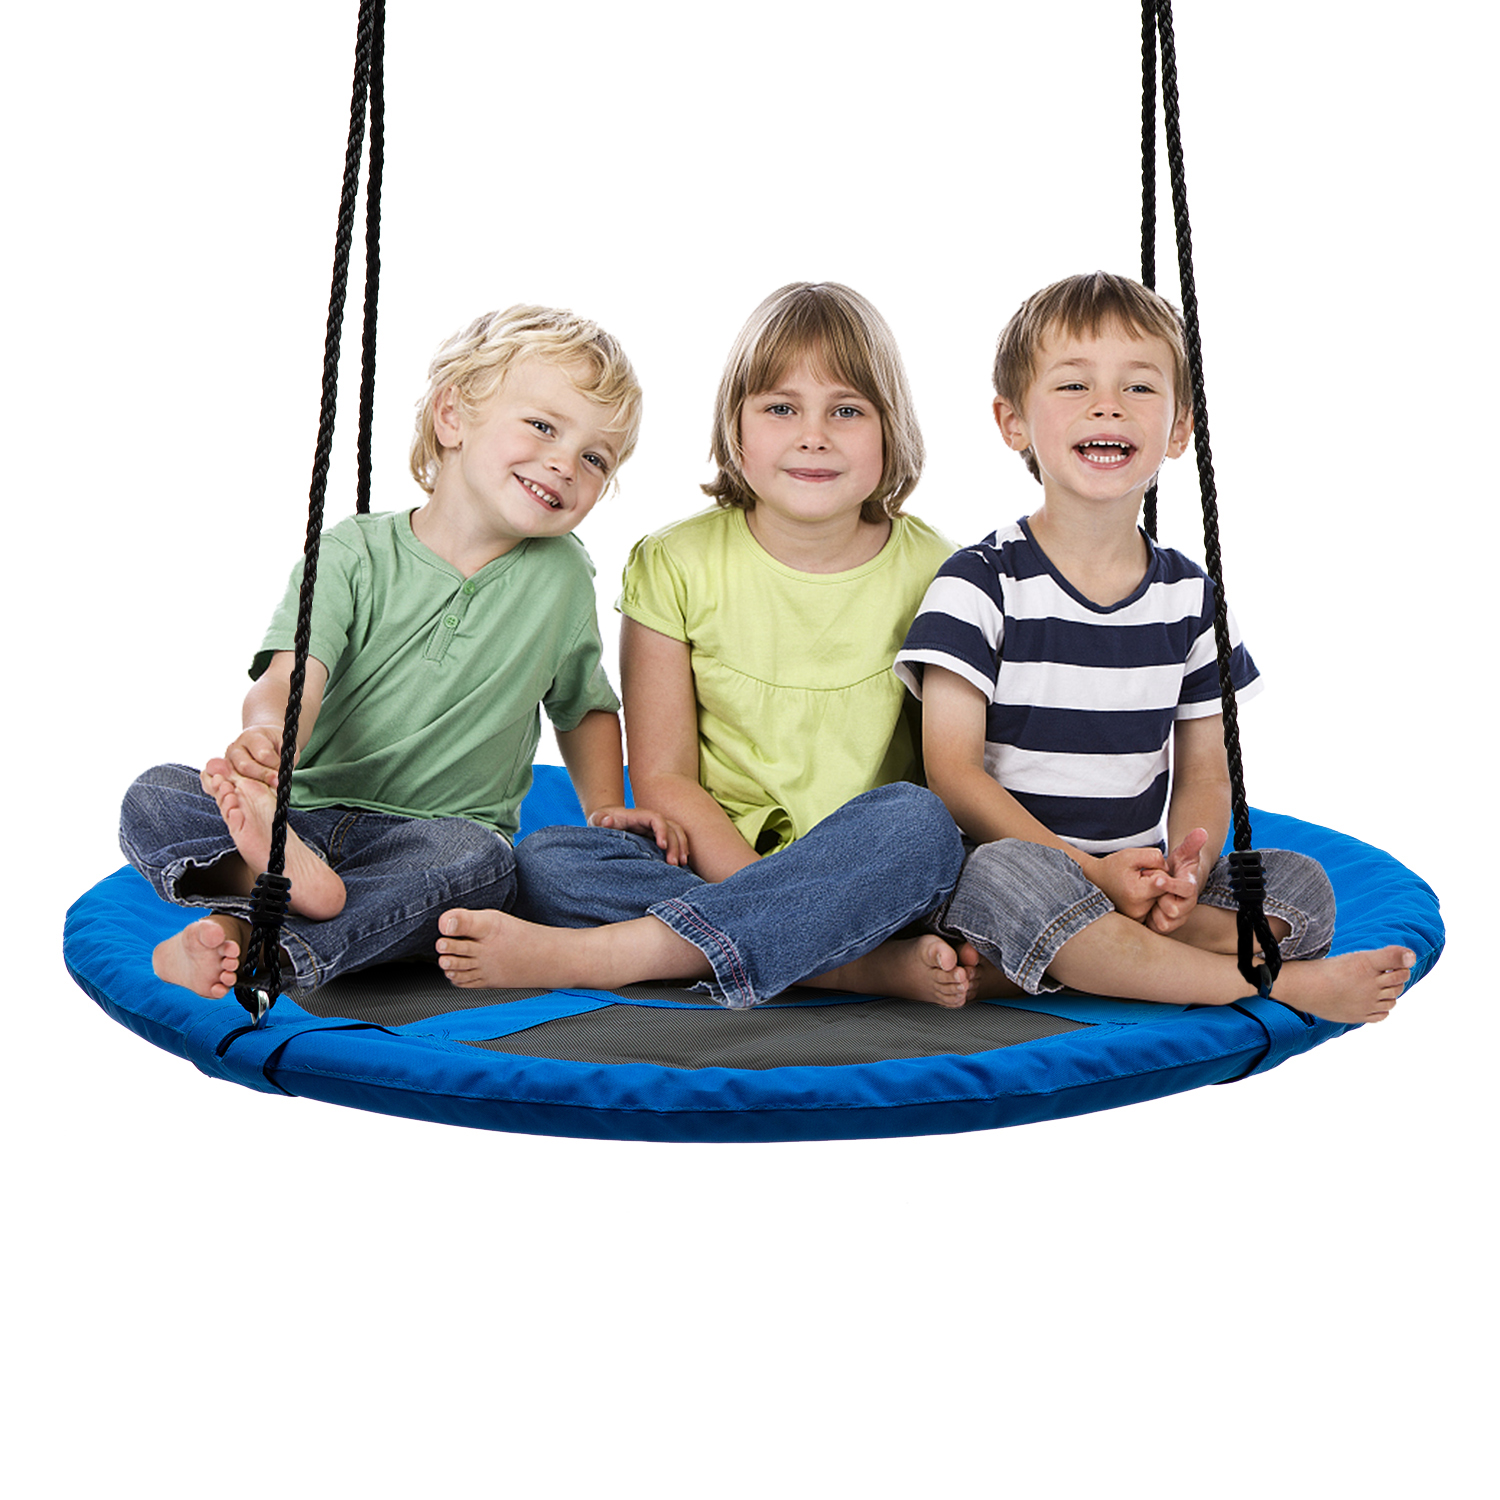 Walsport 40" Round Hanging Chair Swing Multi-seater Rainbow Platform Mat Indoor & Outdoor kids Flying Sky Swing Lounge Chair Park, Blue - image 1 of 14